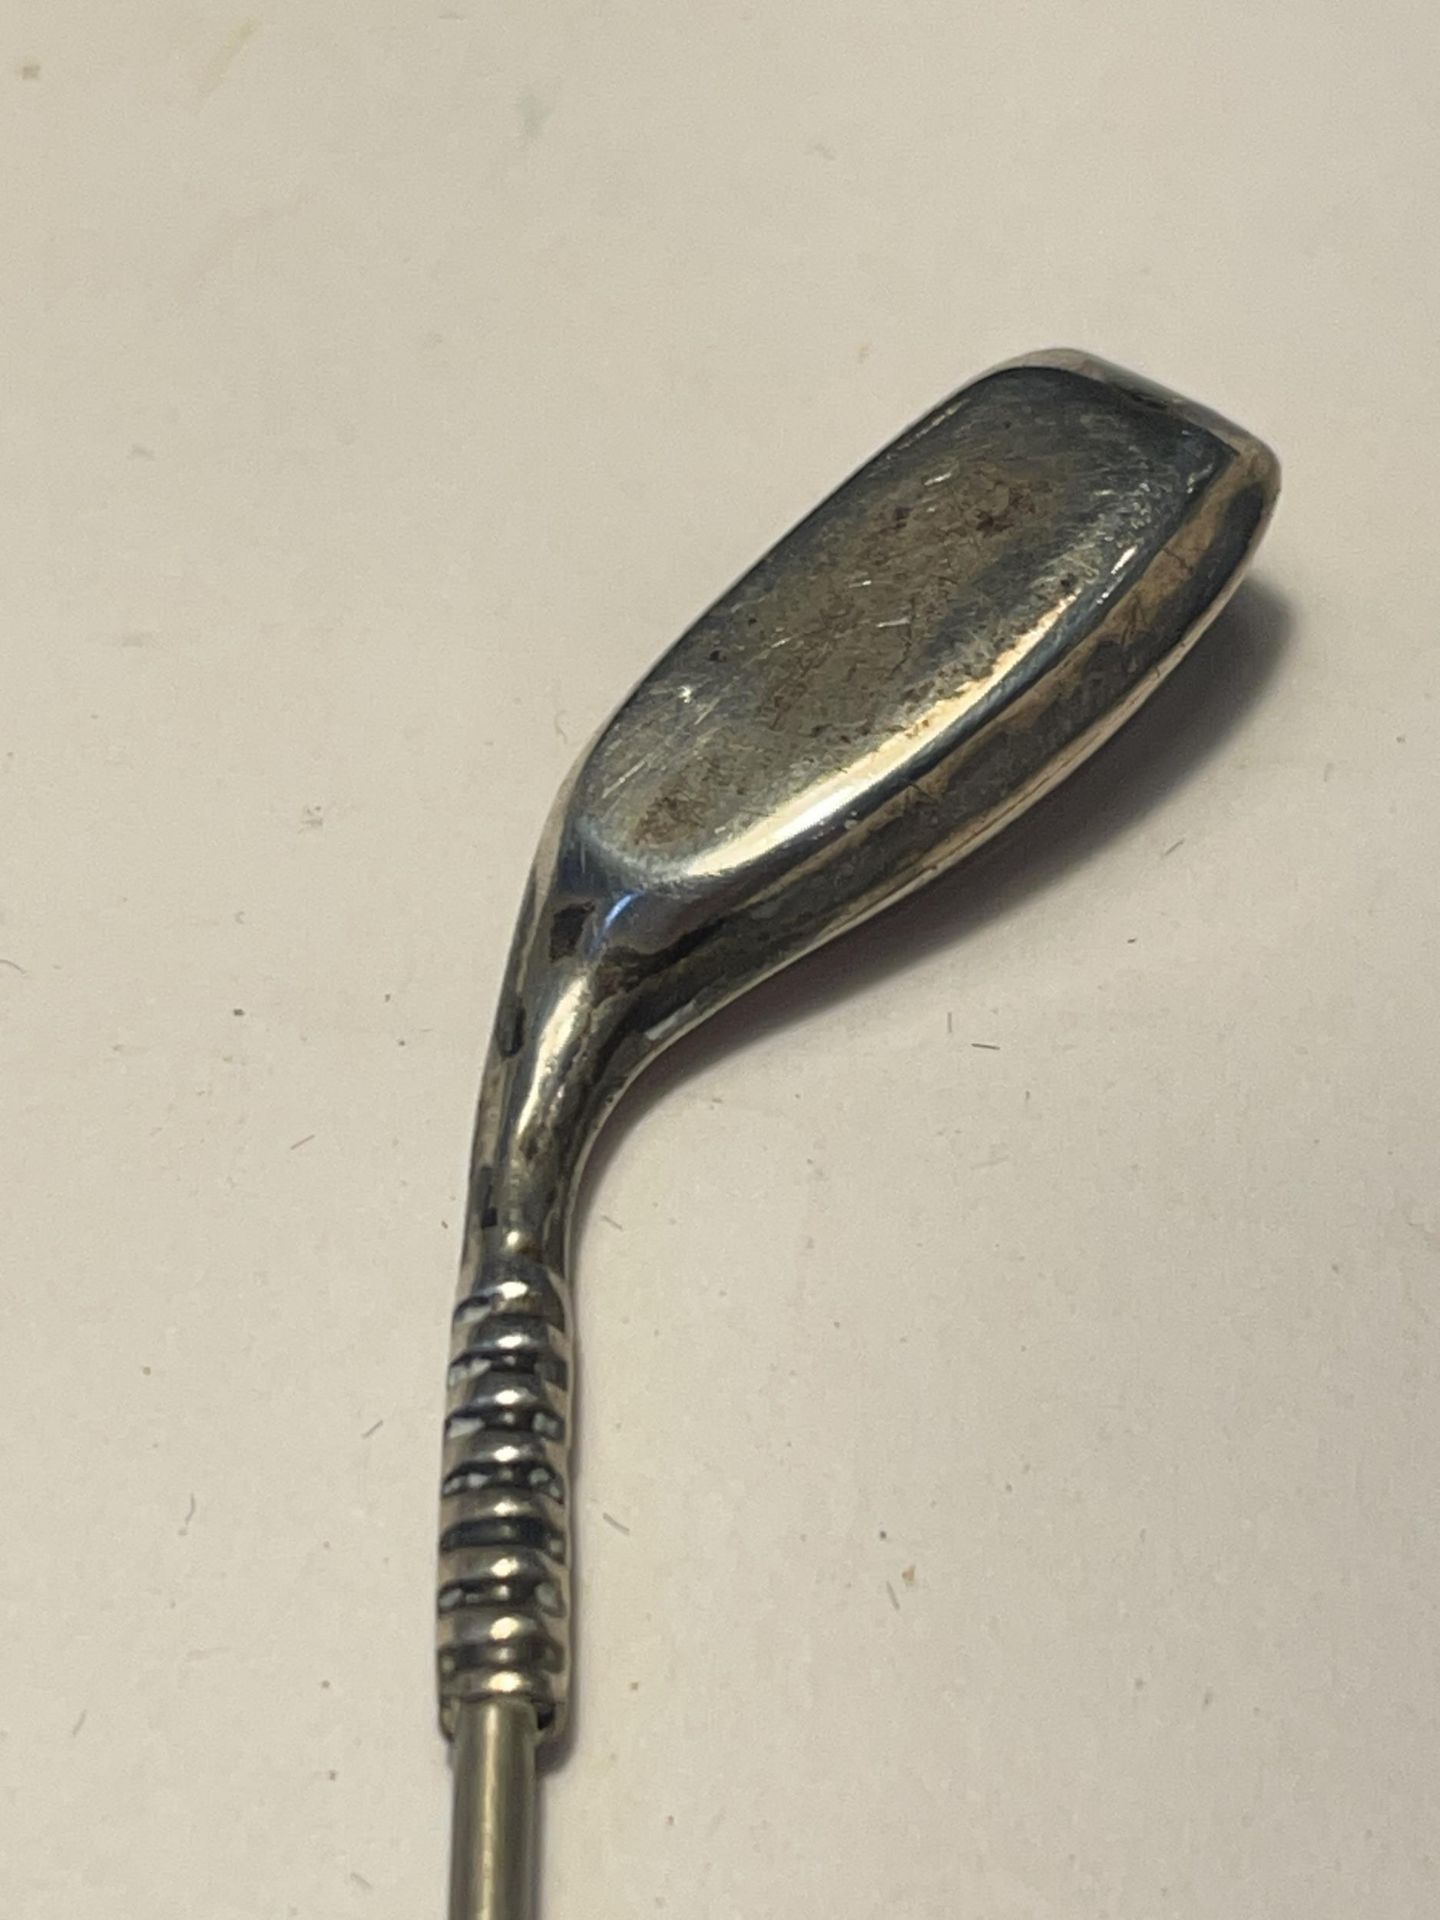 A HALLMARKED BIRMINGHAM SILVER PIN BROOCH IN THE FORM OF A GOLF CLUB - Image 2 of 3